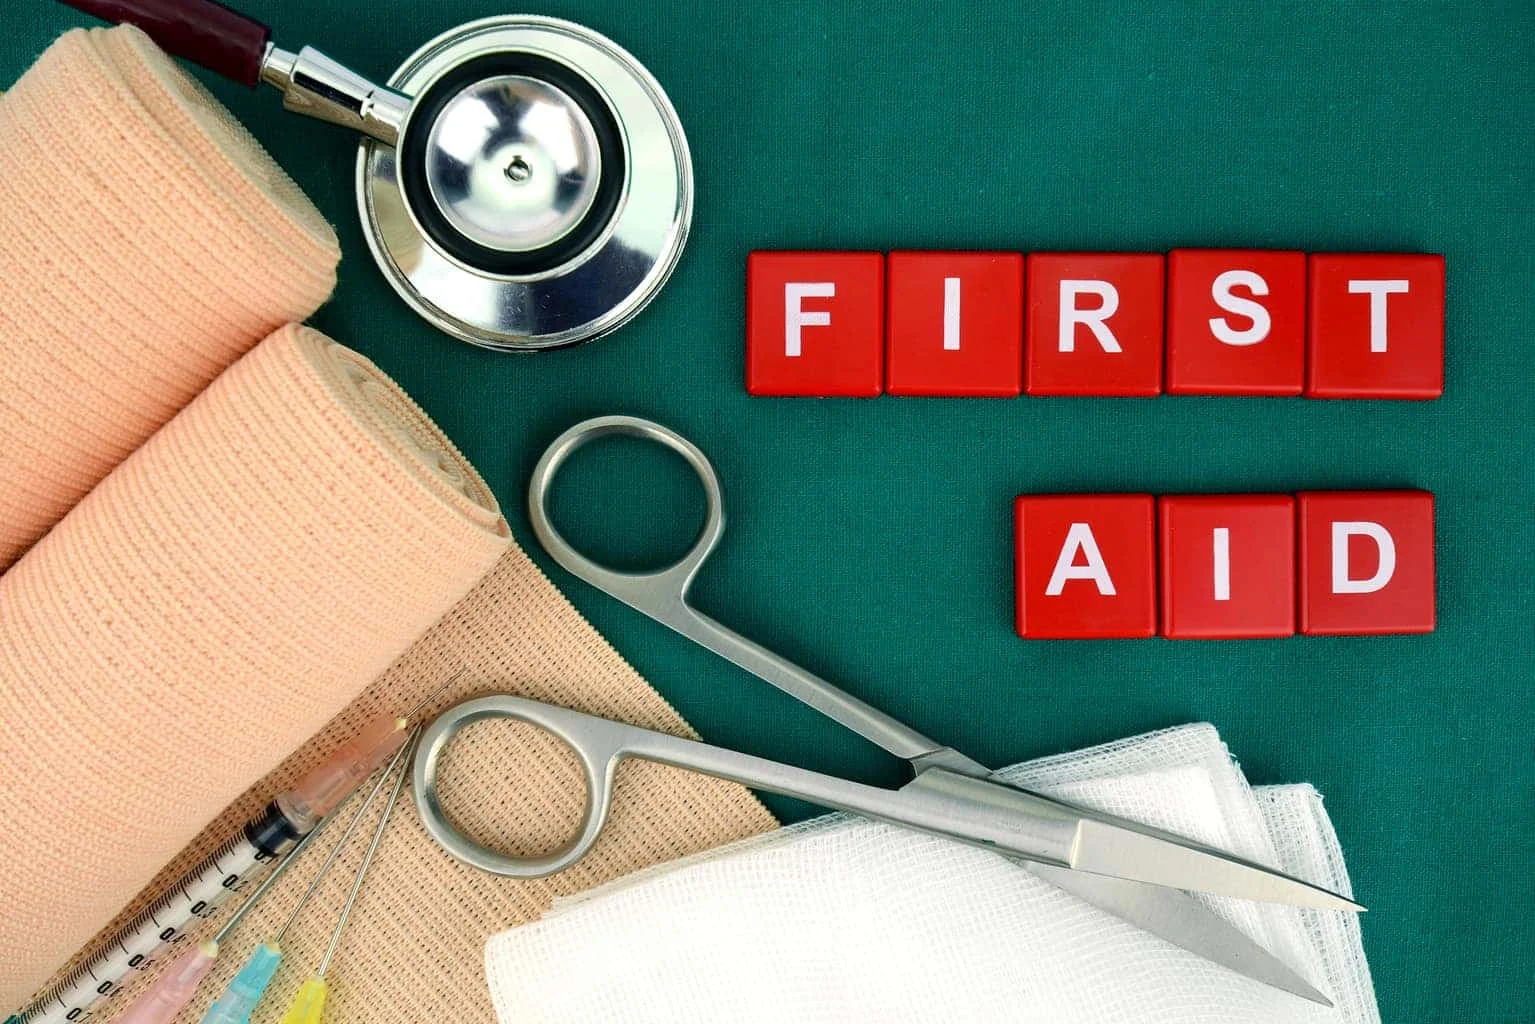 Meaning of First Aid and Why do we give First Aid?